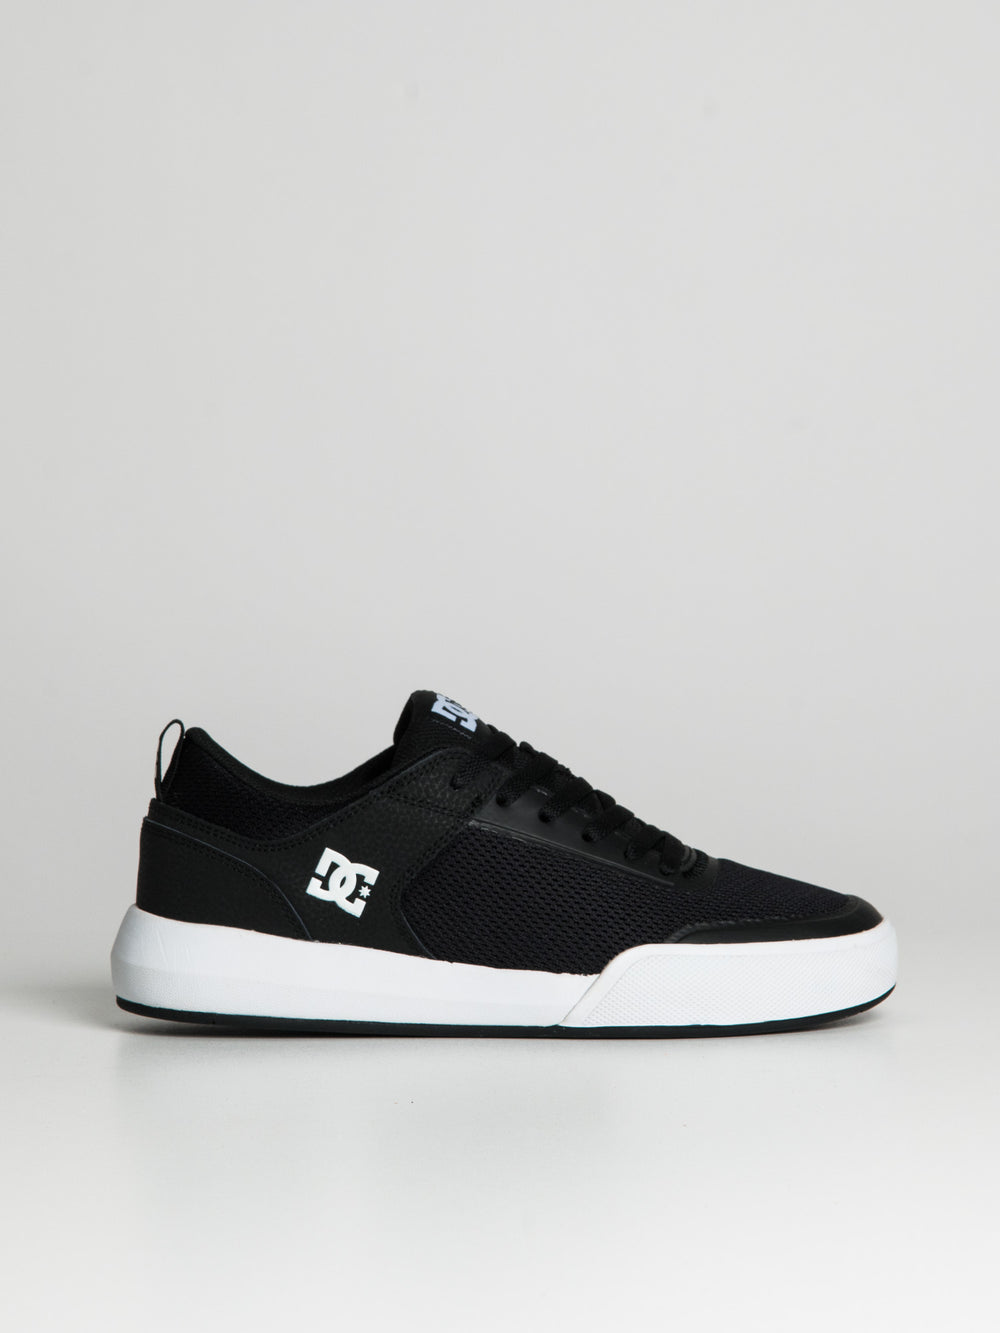 MENS DC SHOES TRANSIT - CLEARANCE